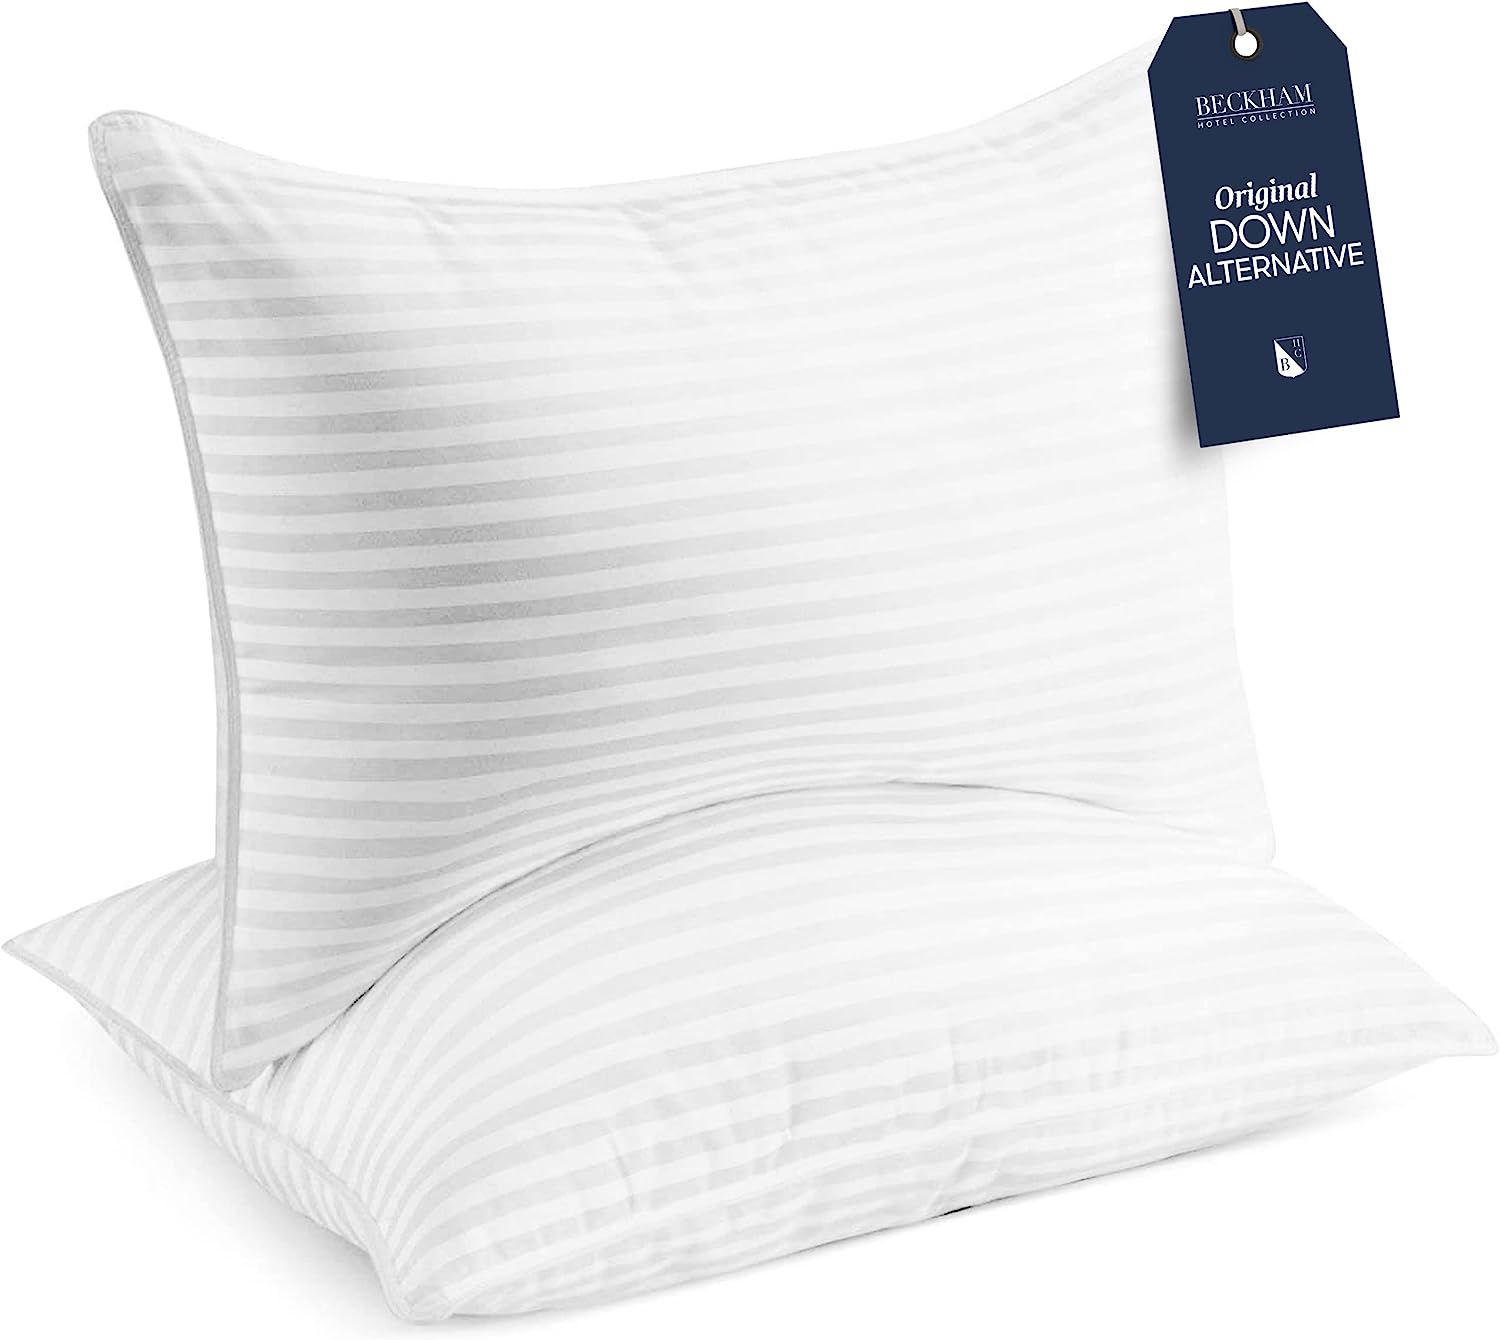 Top 10 Bed Pillows for a Good Night's Sleep